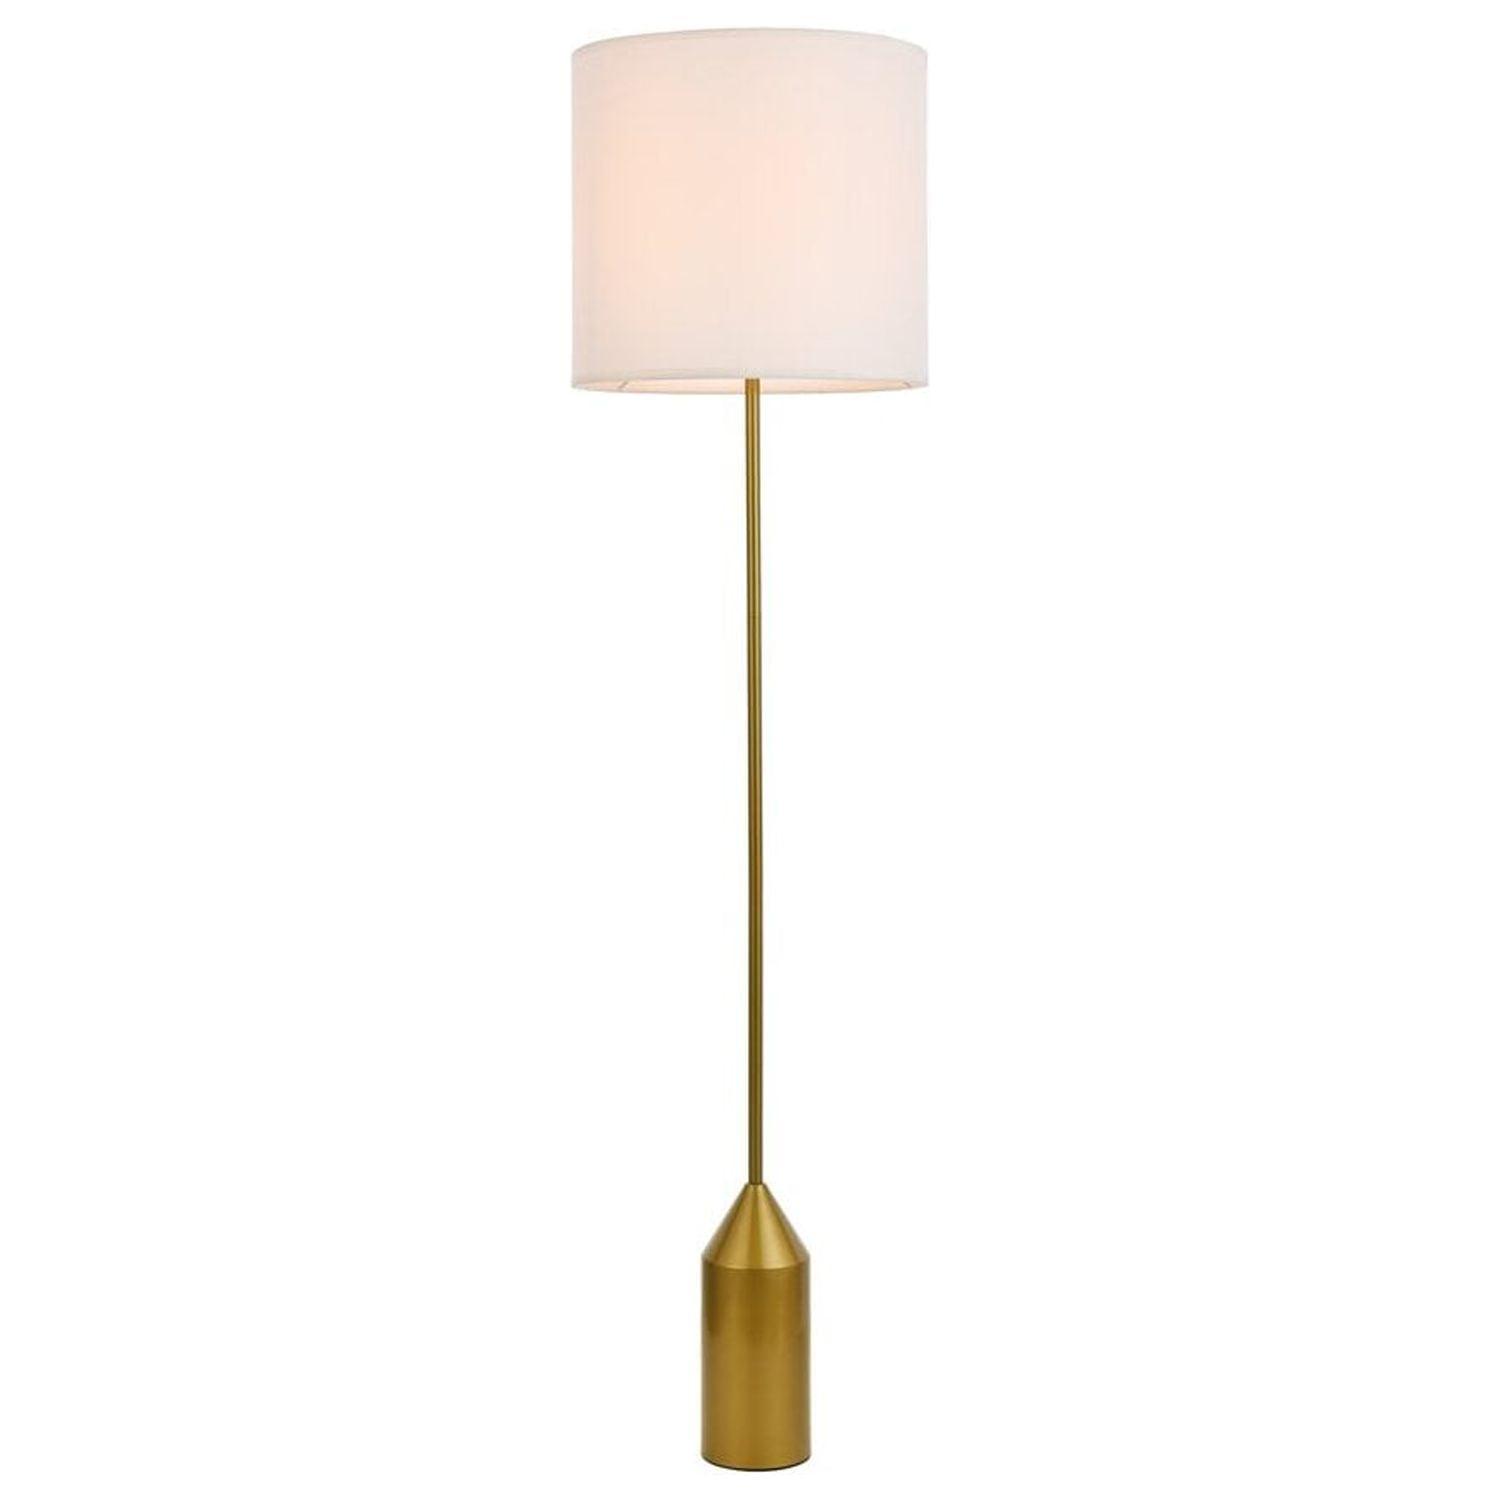 Adjustable Ines Black Brass Floor Lamp with White Fabric Shade